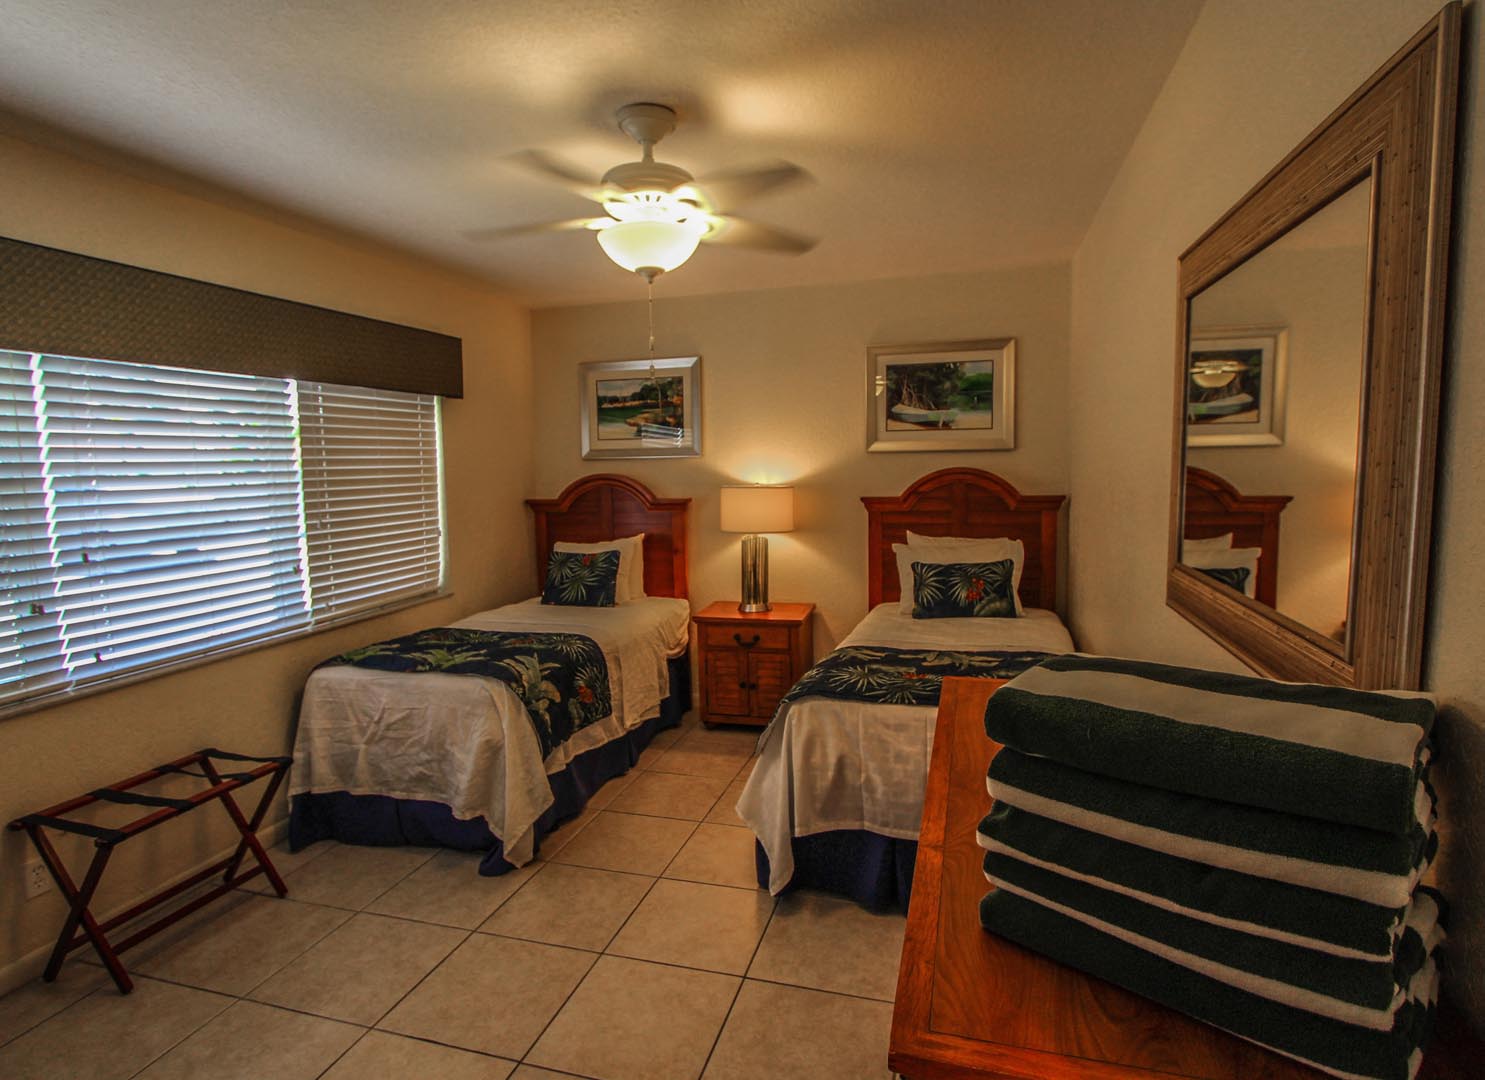 A bedroom with double beds at VRI's Mariner Beach Club in St. Pete Beach, Florida.